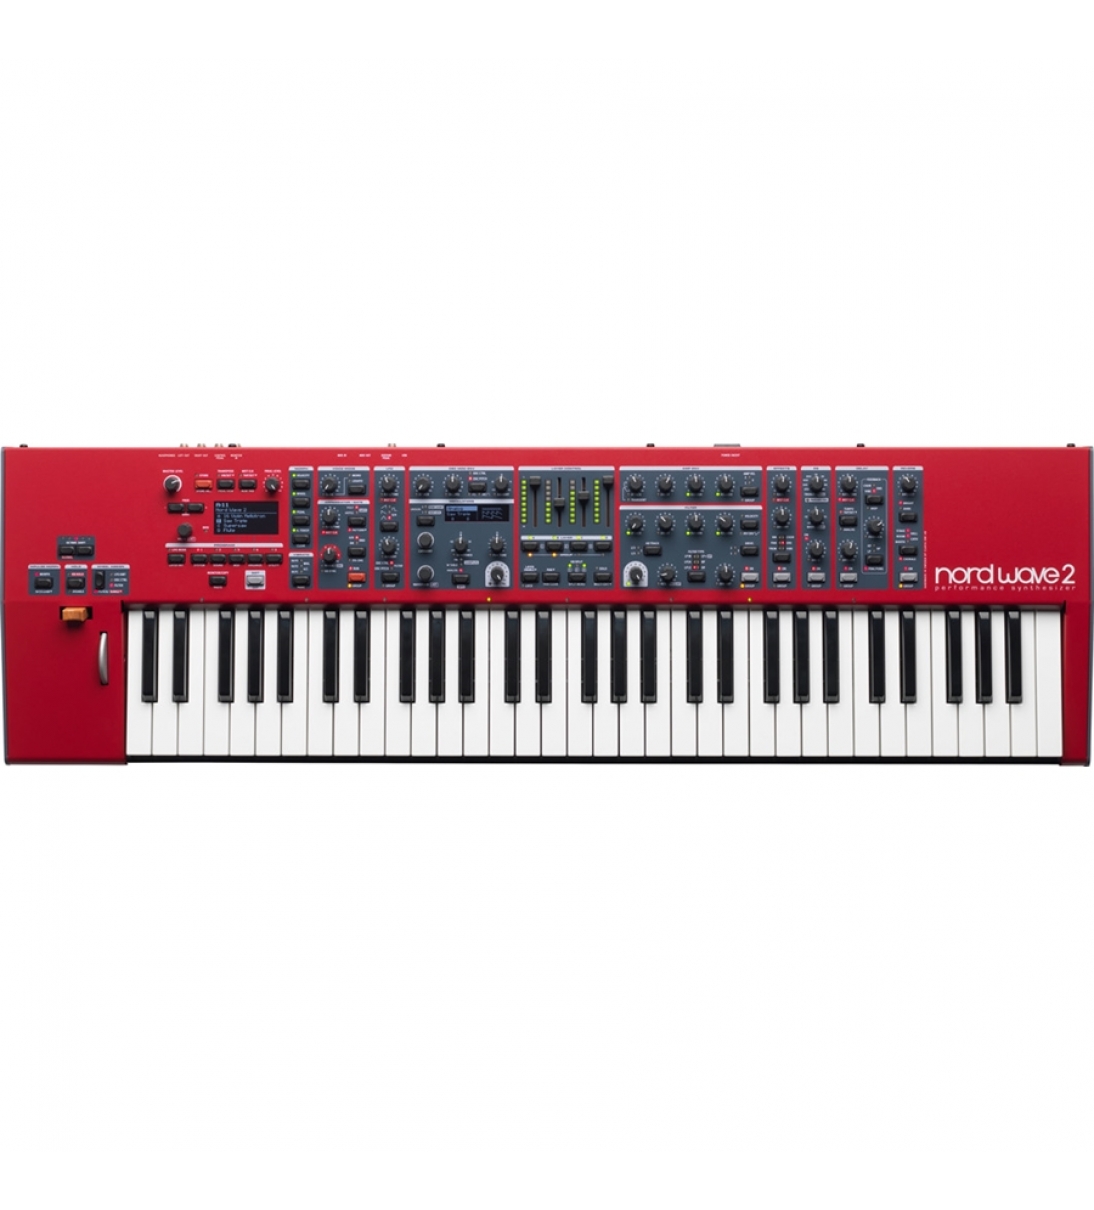 WAVE 2-Performing Synthesizer